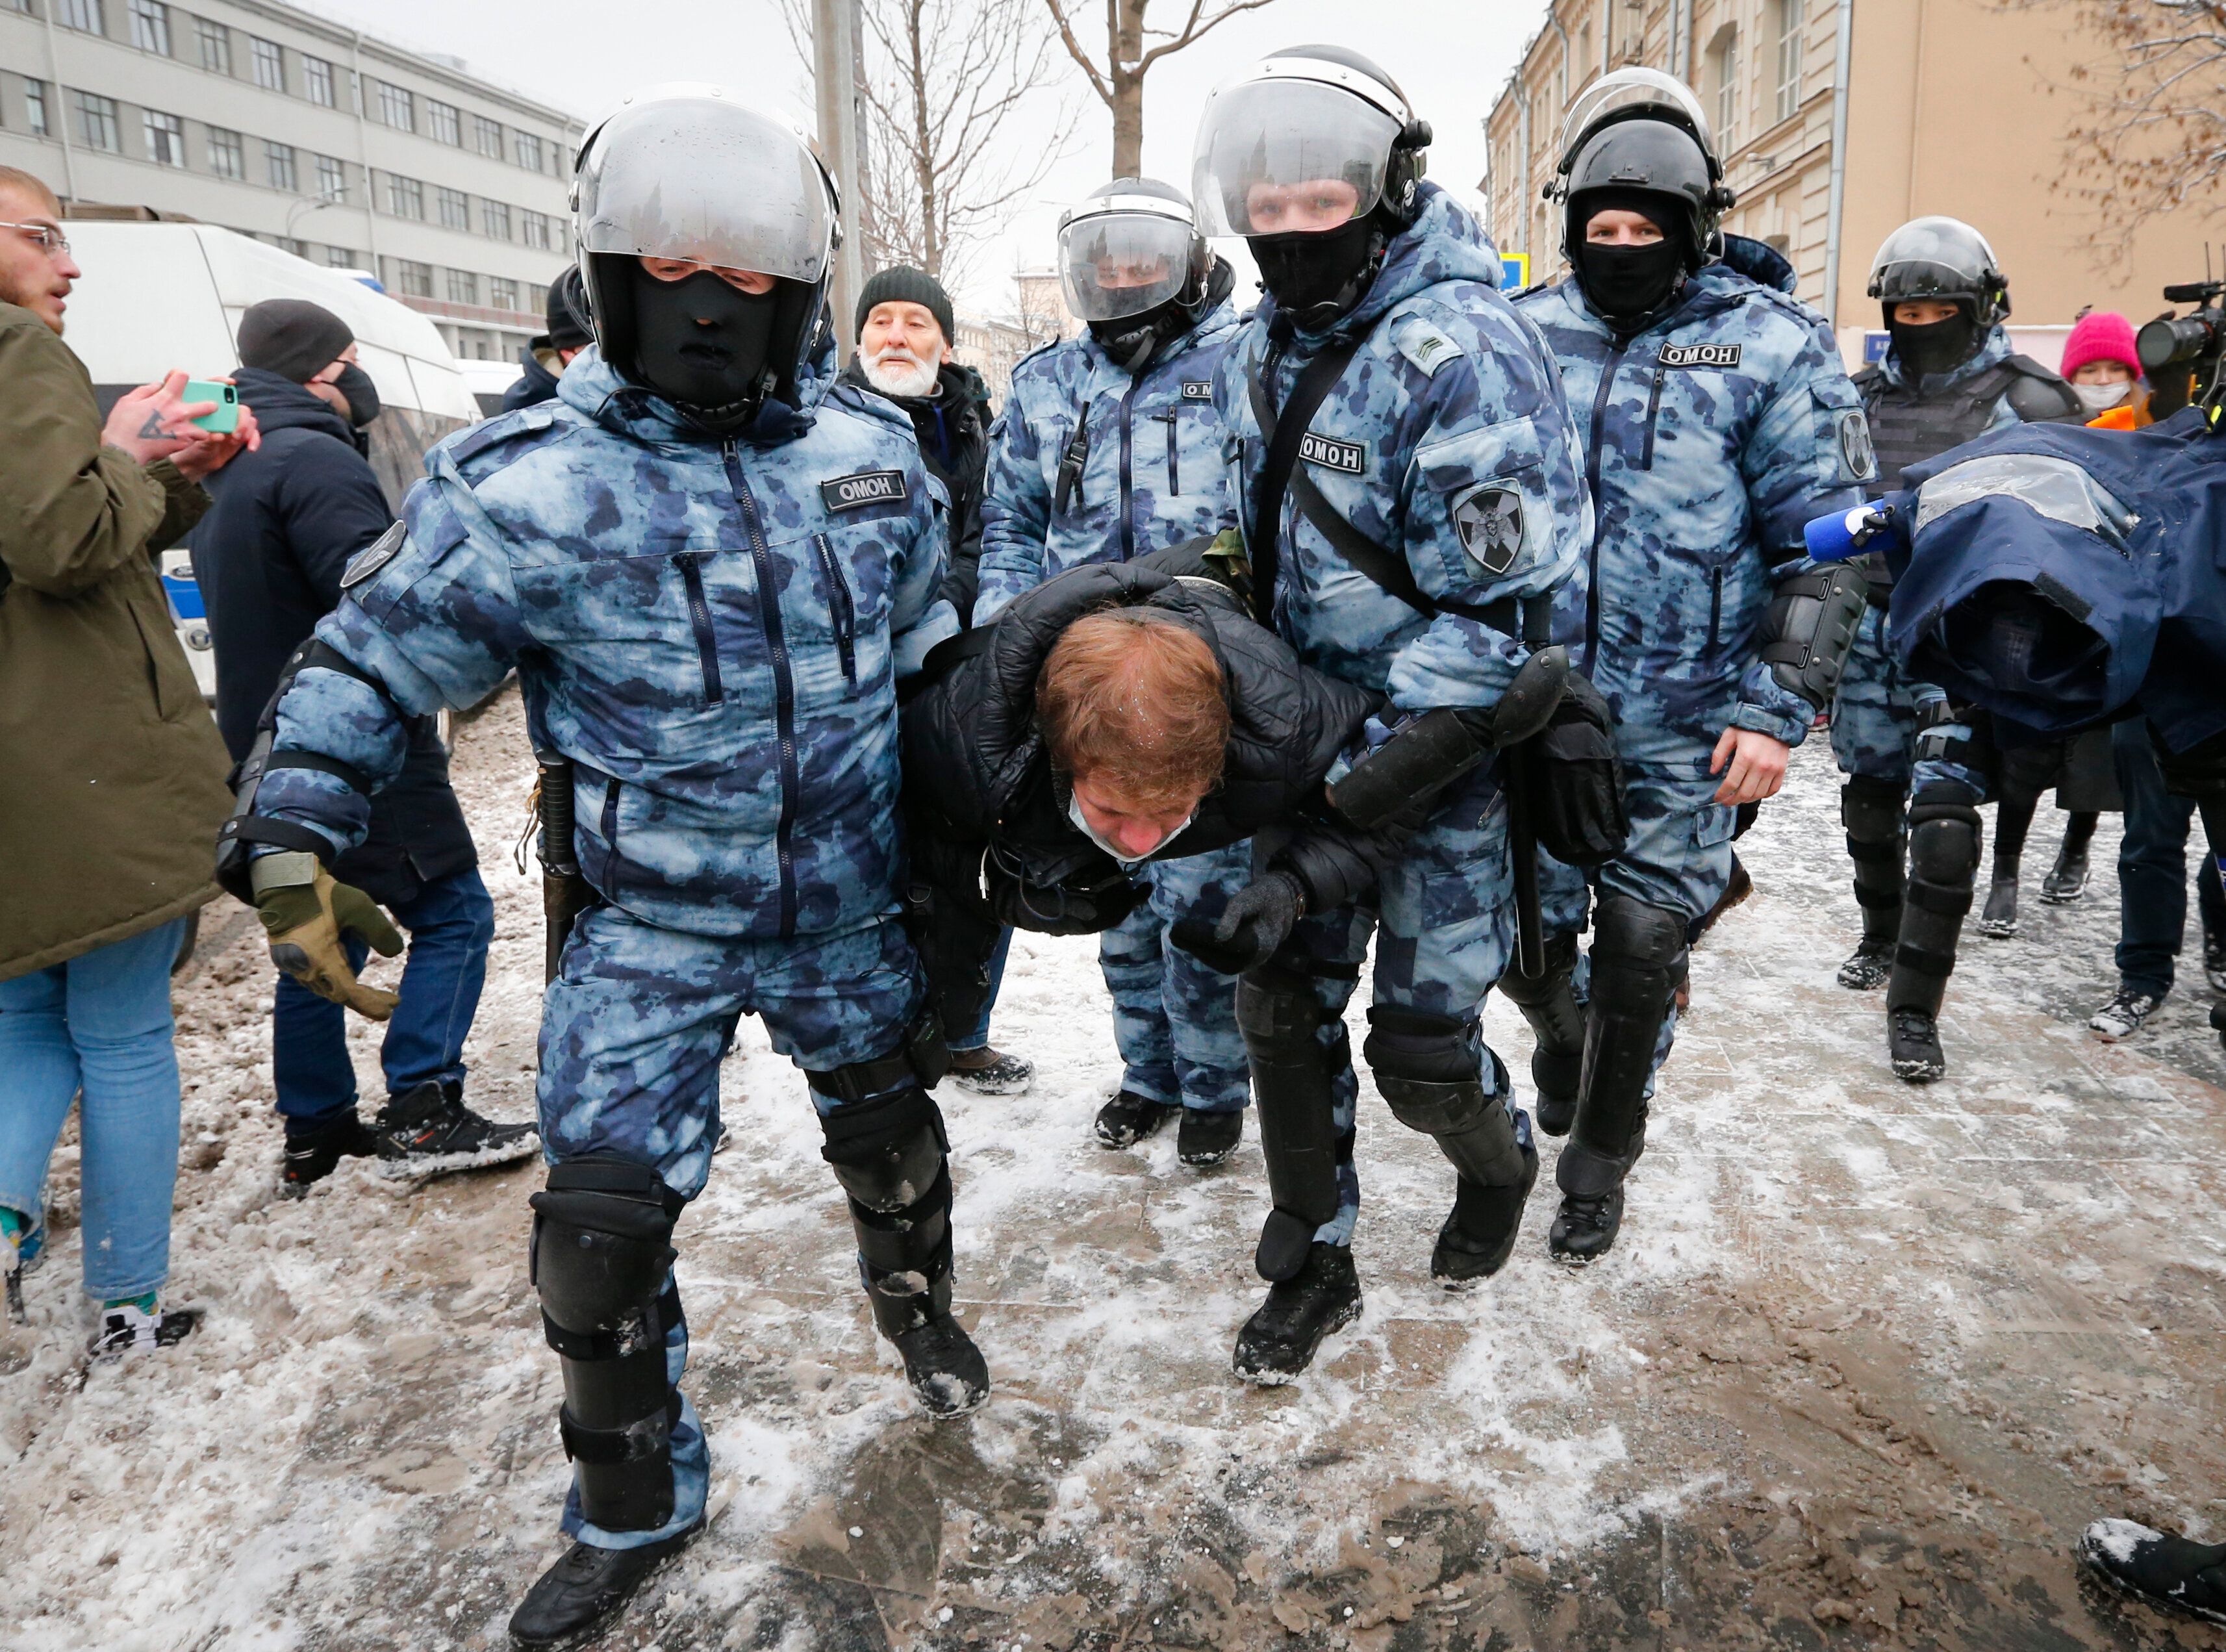 Police officers detain a man during a protest against the jailing of opposition leader Alexei Navalny in Moscow, Russia, on S